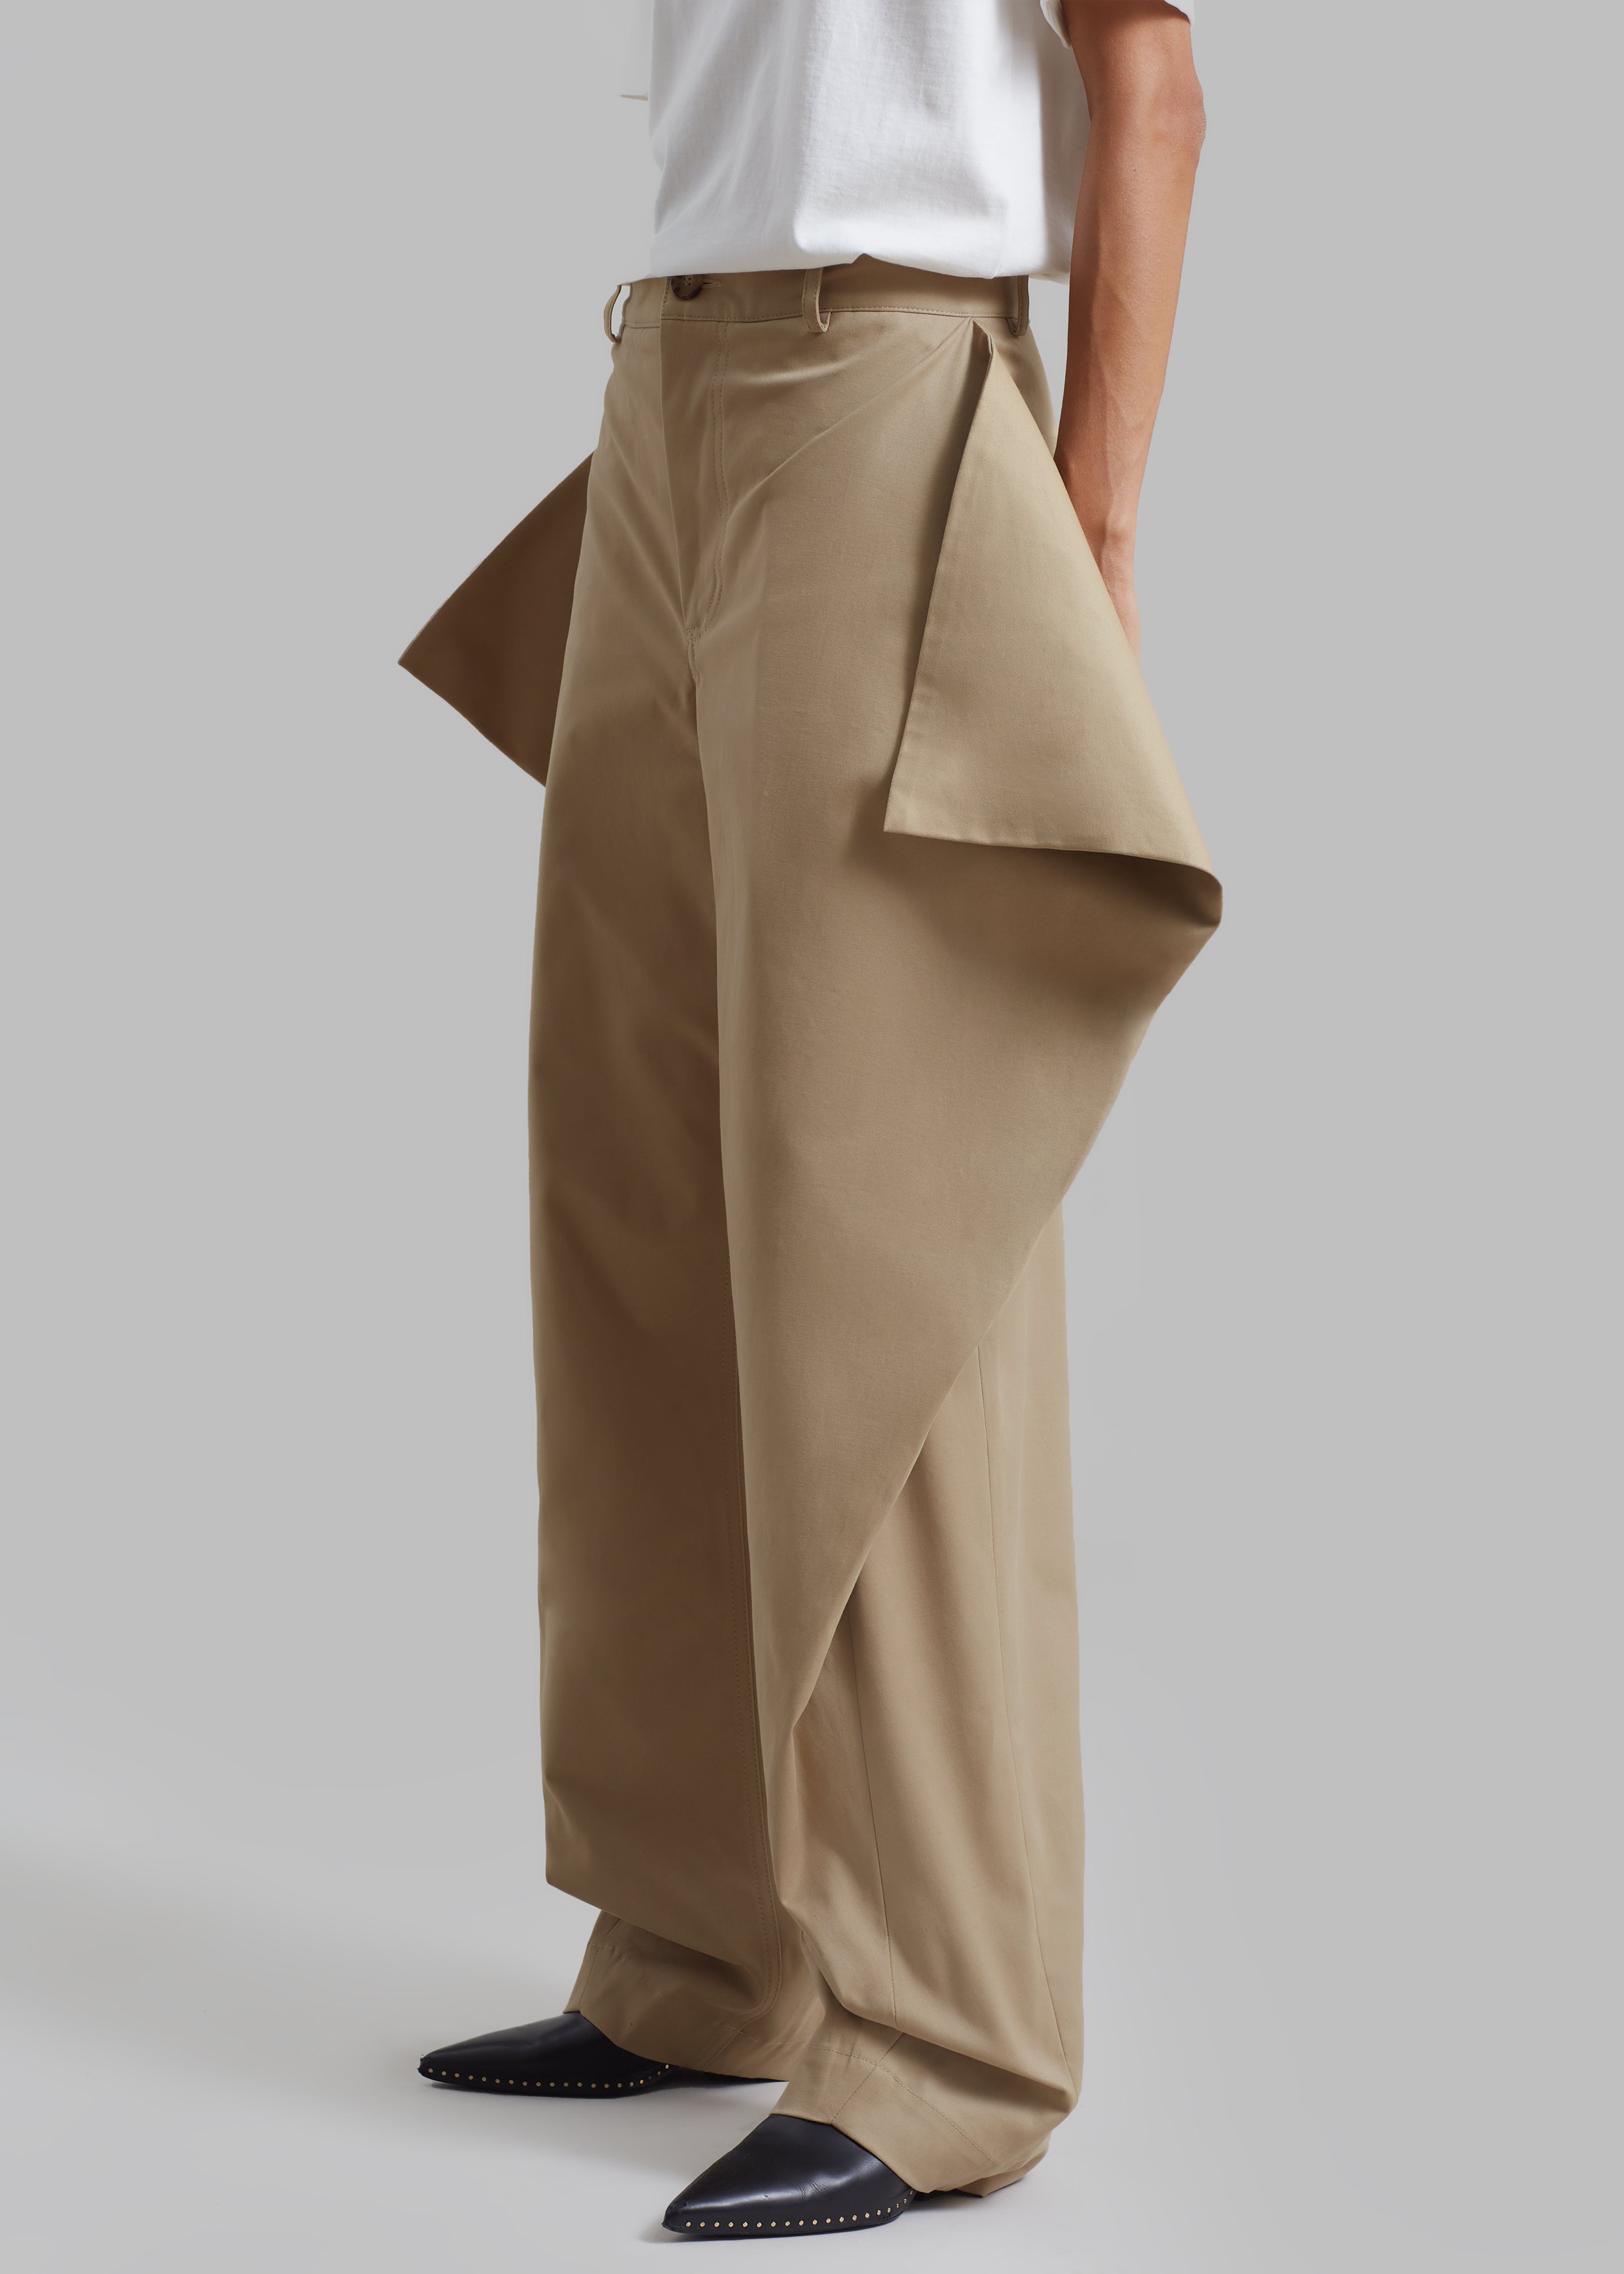 JW Anderson Kite Trousers - Flax - 4